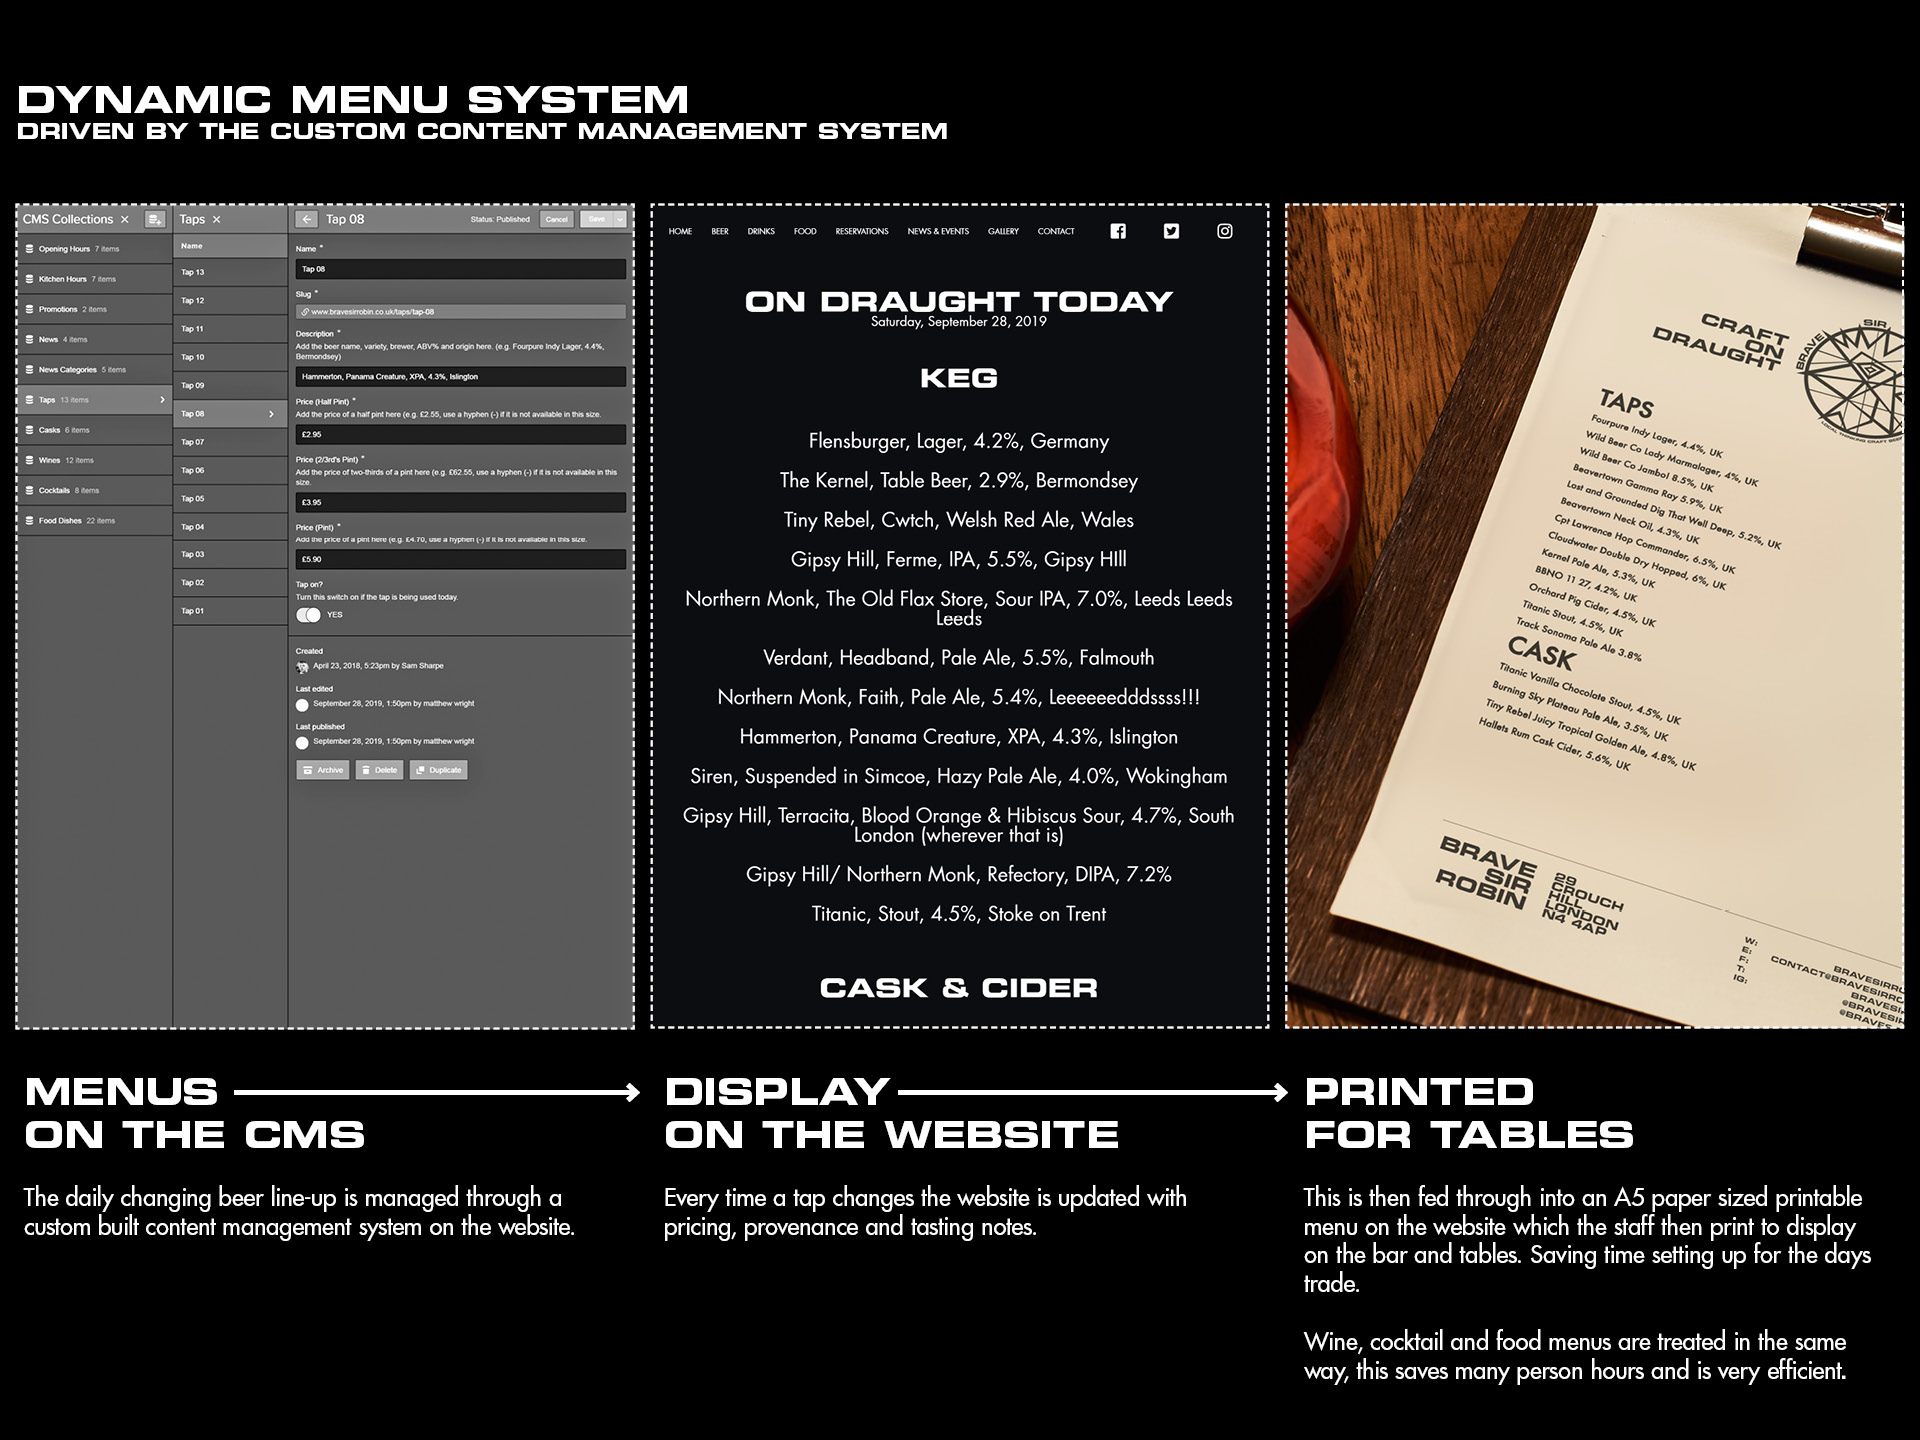 Dynamic CMS driven drinks and food menus for website and print display